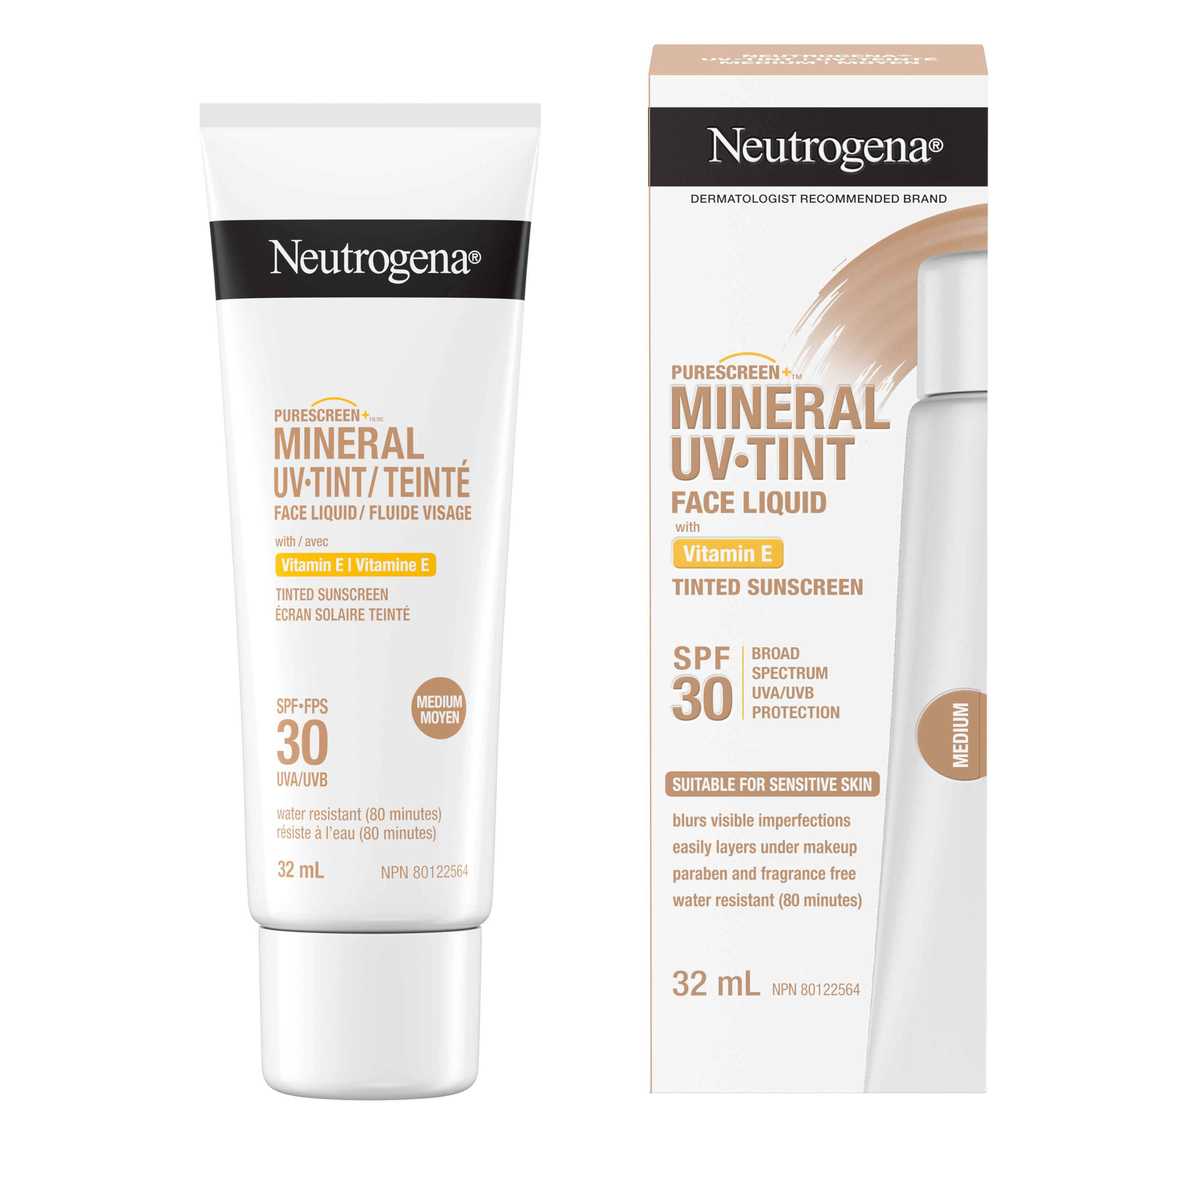 Front shot of NEUTROGENA® Purescreen+™ Mineral UV Tint Face Liquid Sunscreen, Medium, SPF 30, 32 mL squeeze tube and its packaging